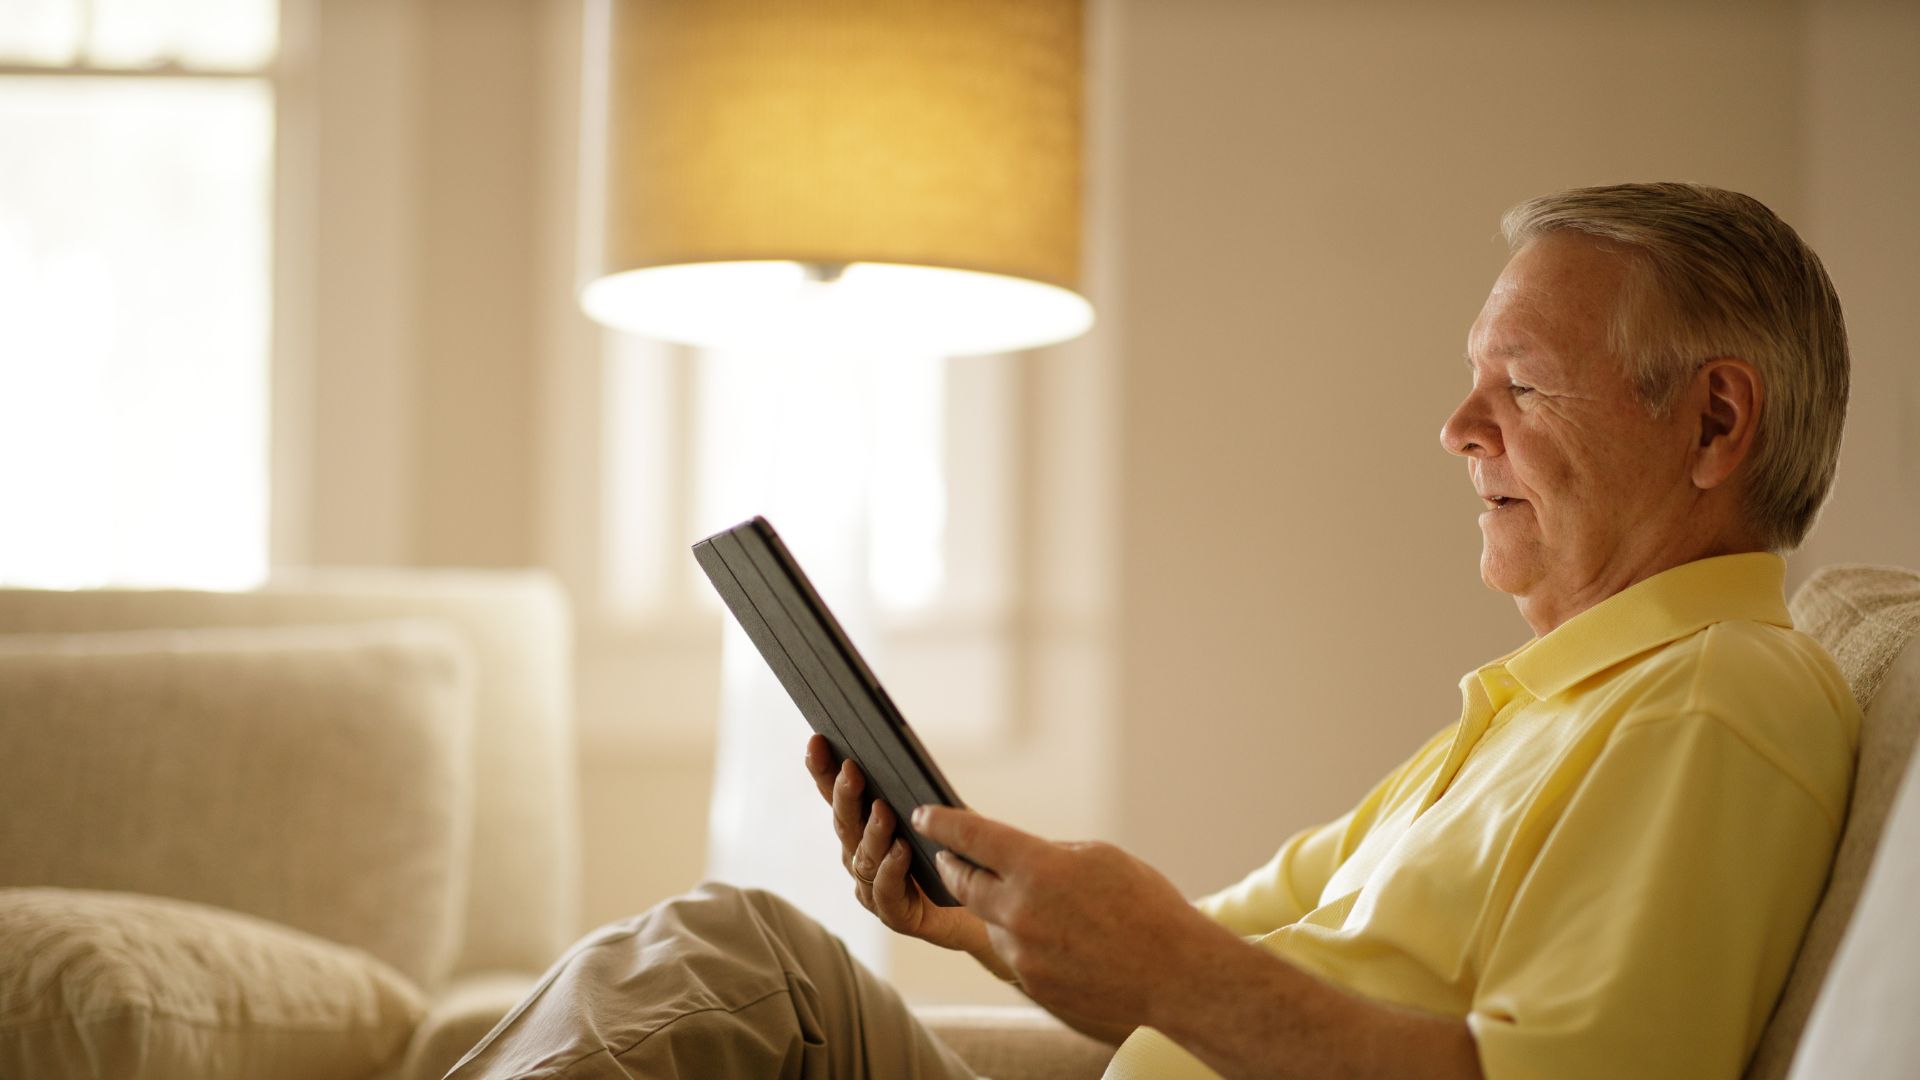 Man sits in recliner looking at tablet.